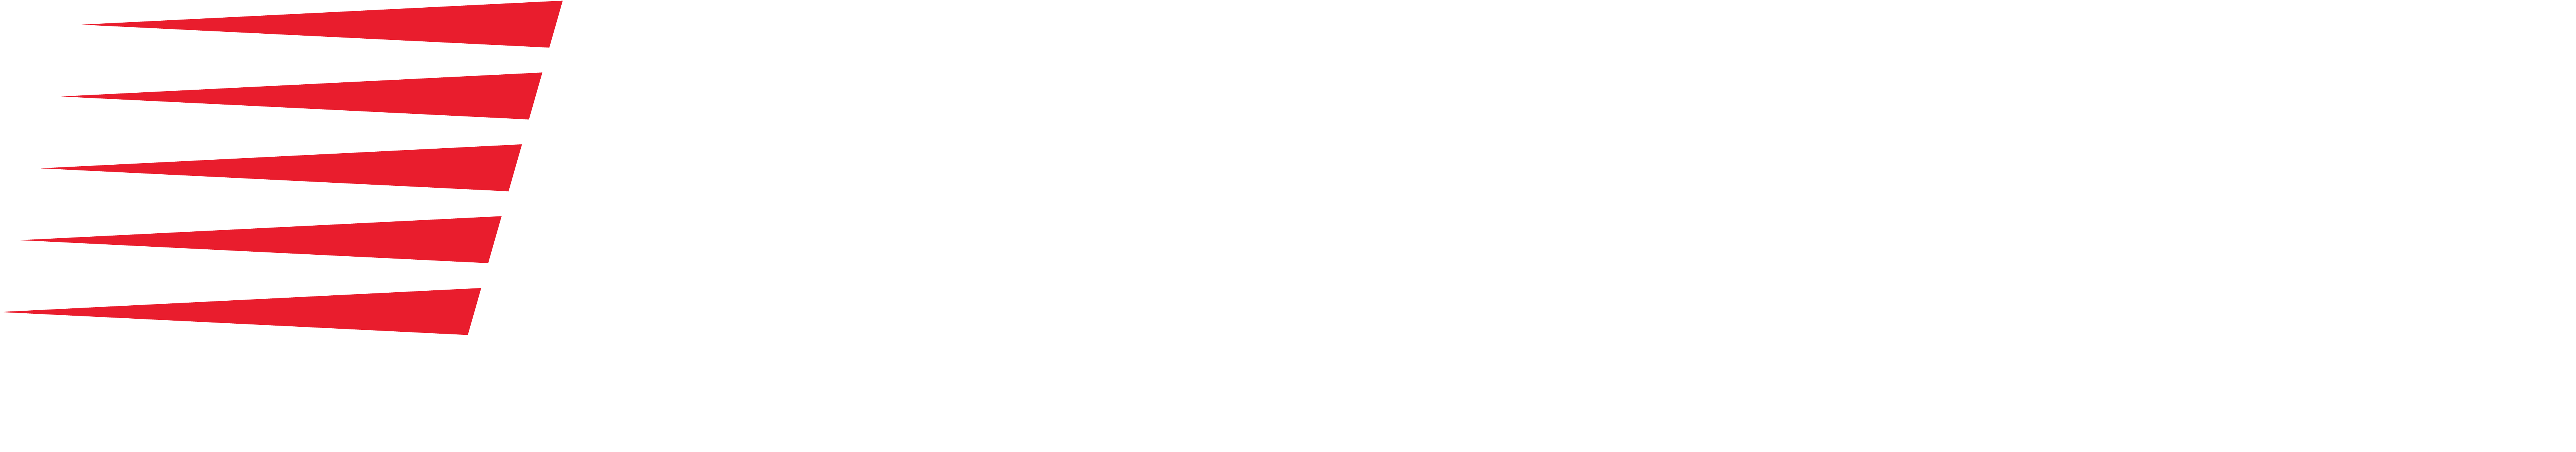 Cres Cor-Proudly Made in America Since !936